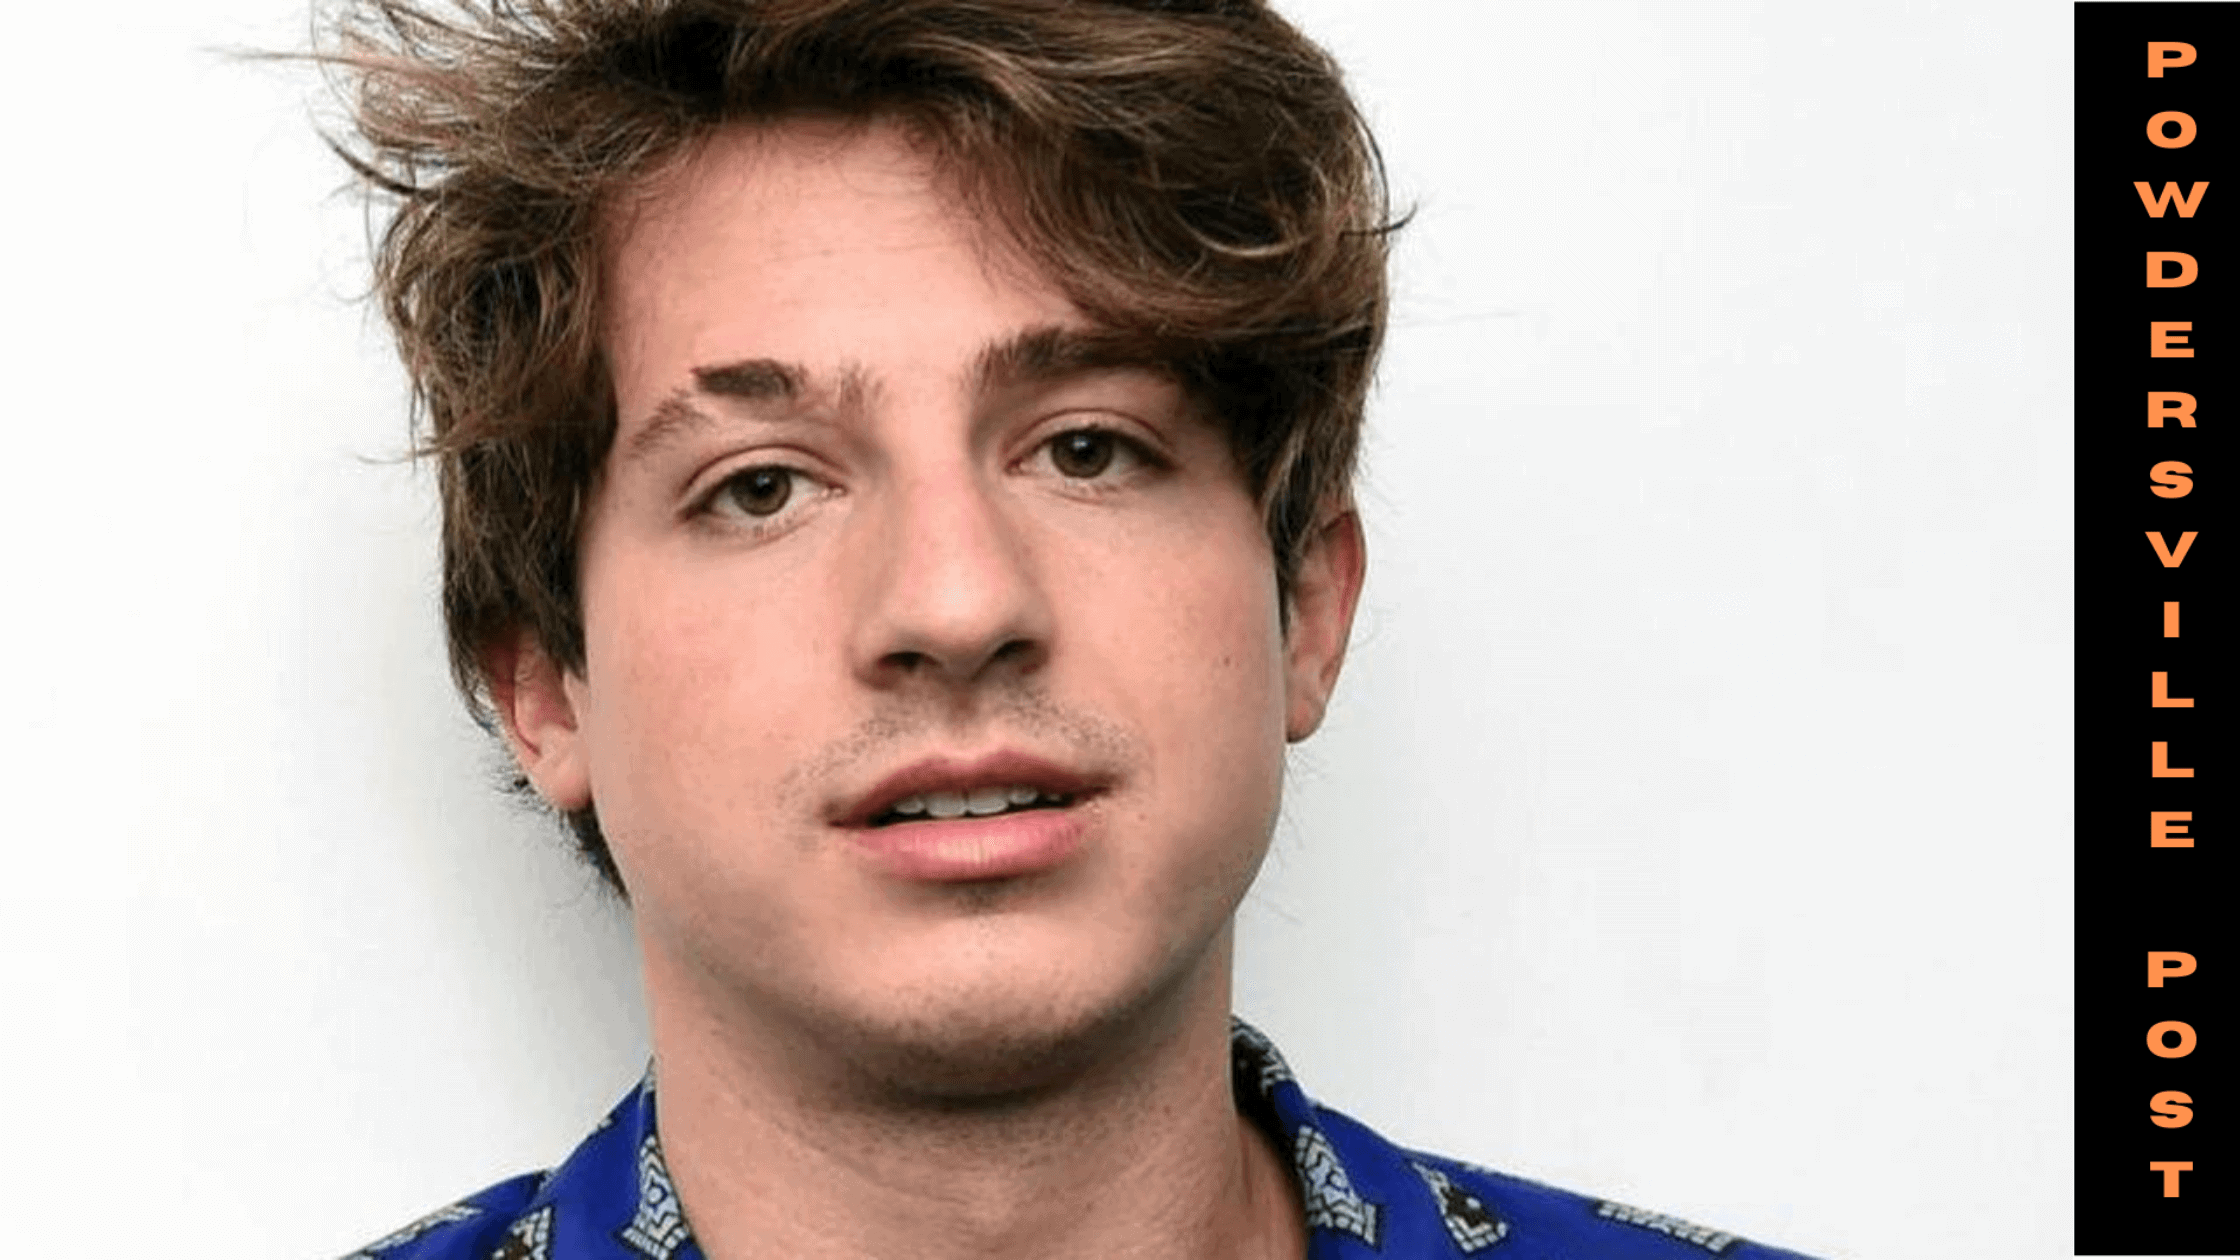 Who Is Charlie Puth Girlfriend In 2022 The Girls He Dated In The Past Included Selena Gomez, Bella Thorne, And Jade